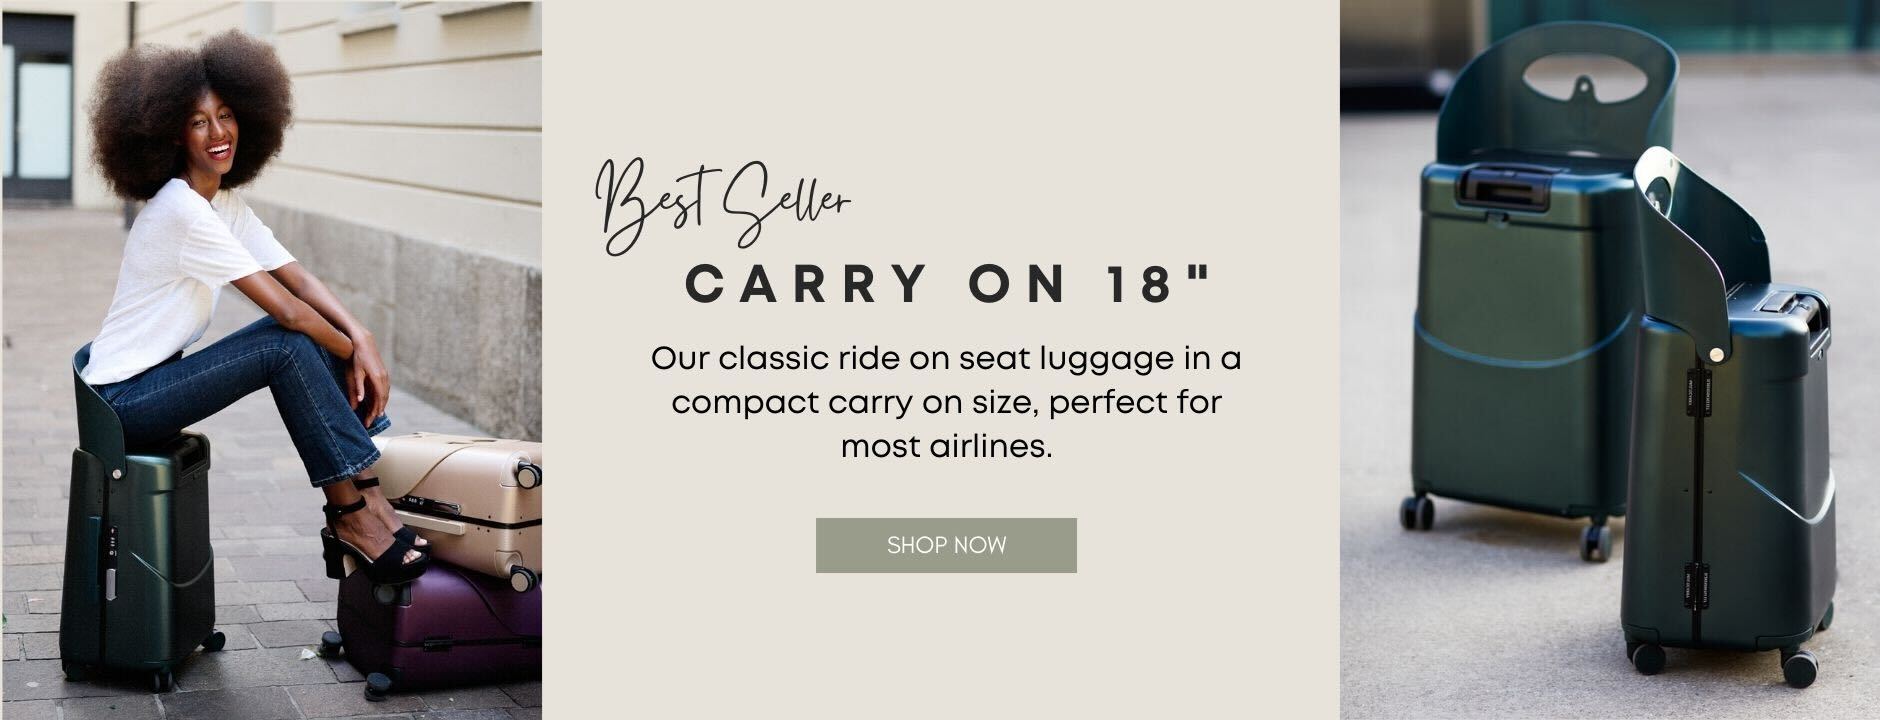 MiaMily Carry on 20 Luggage - The First Ride on Luggage for Both Children and Adults, Accommodating Up to 220lbs. Slate Blue / 20